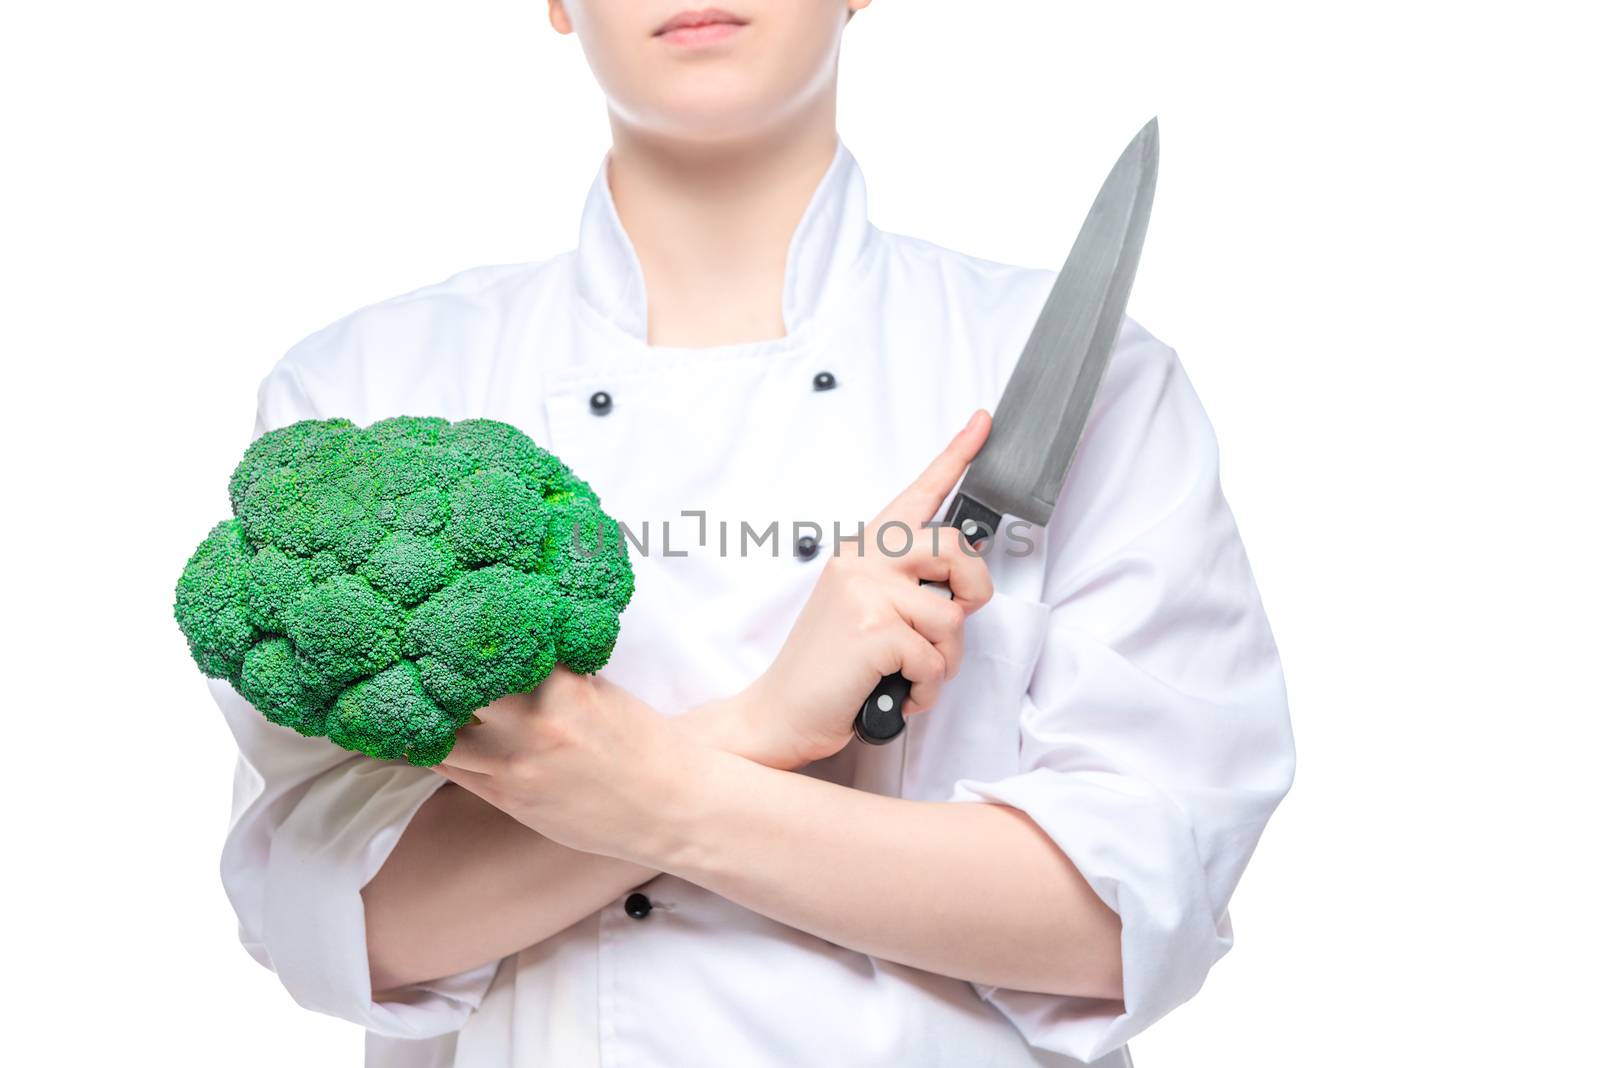 broccoli and a sharp knife in the hands of the cook close-up on a white background